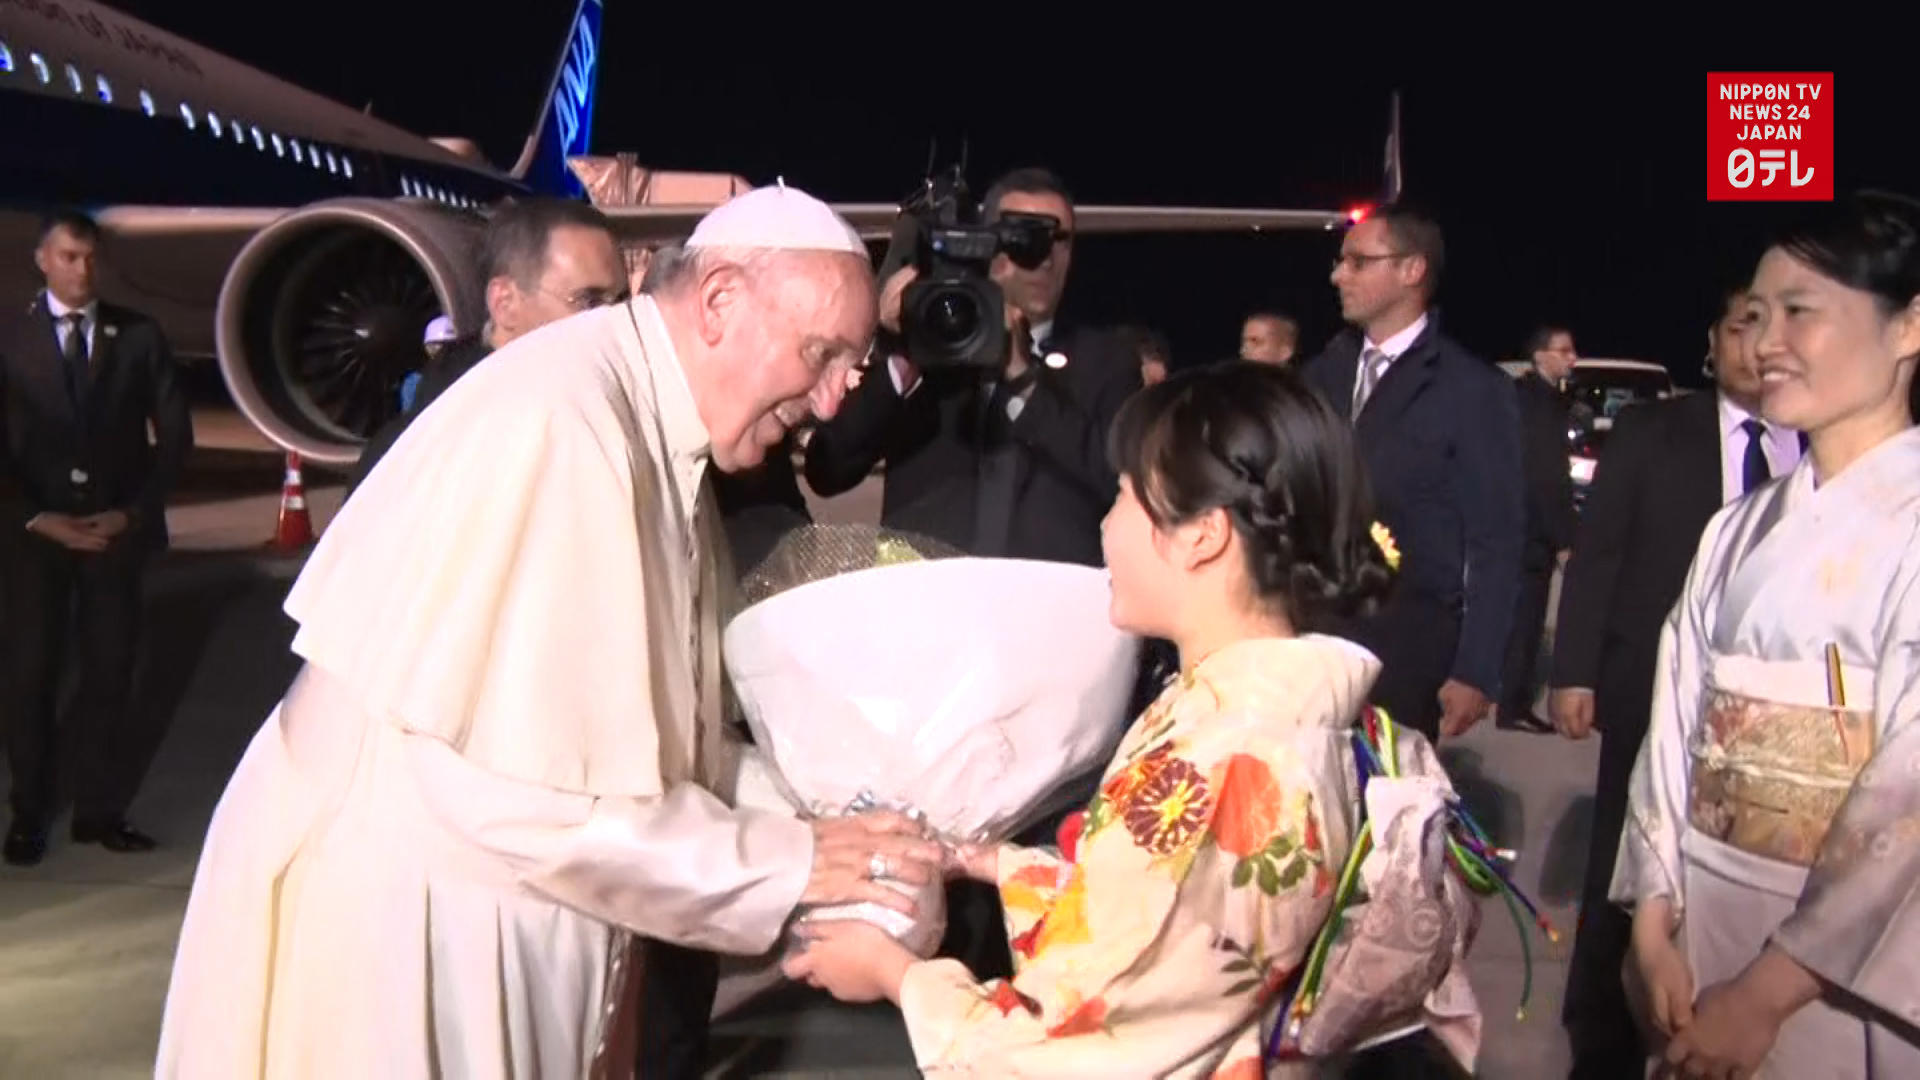 Pope Francis appeals for peace in Hiroshima